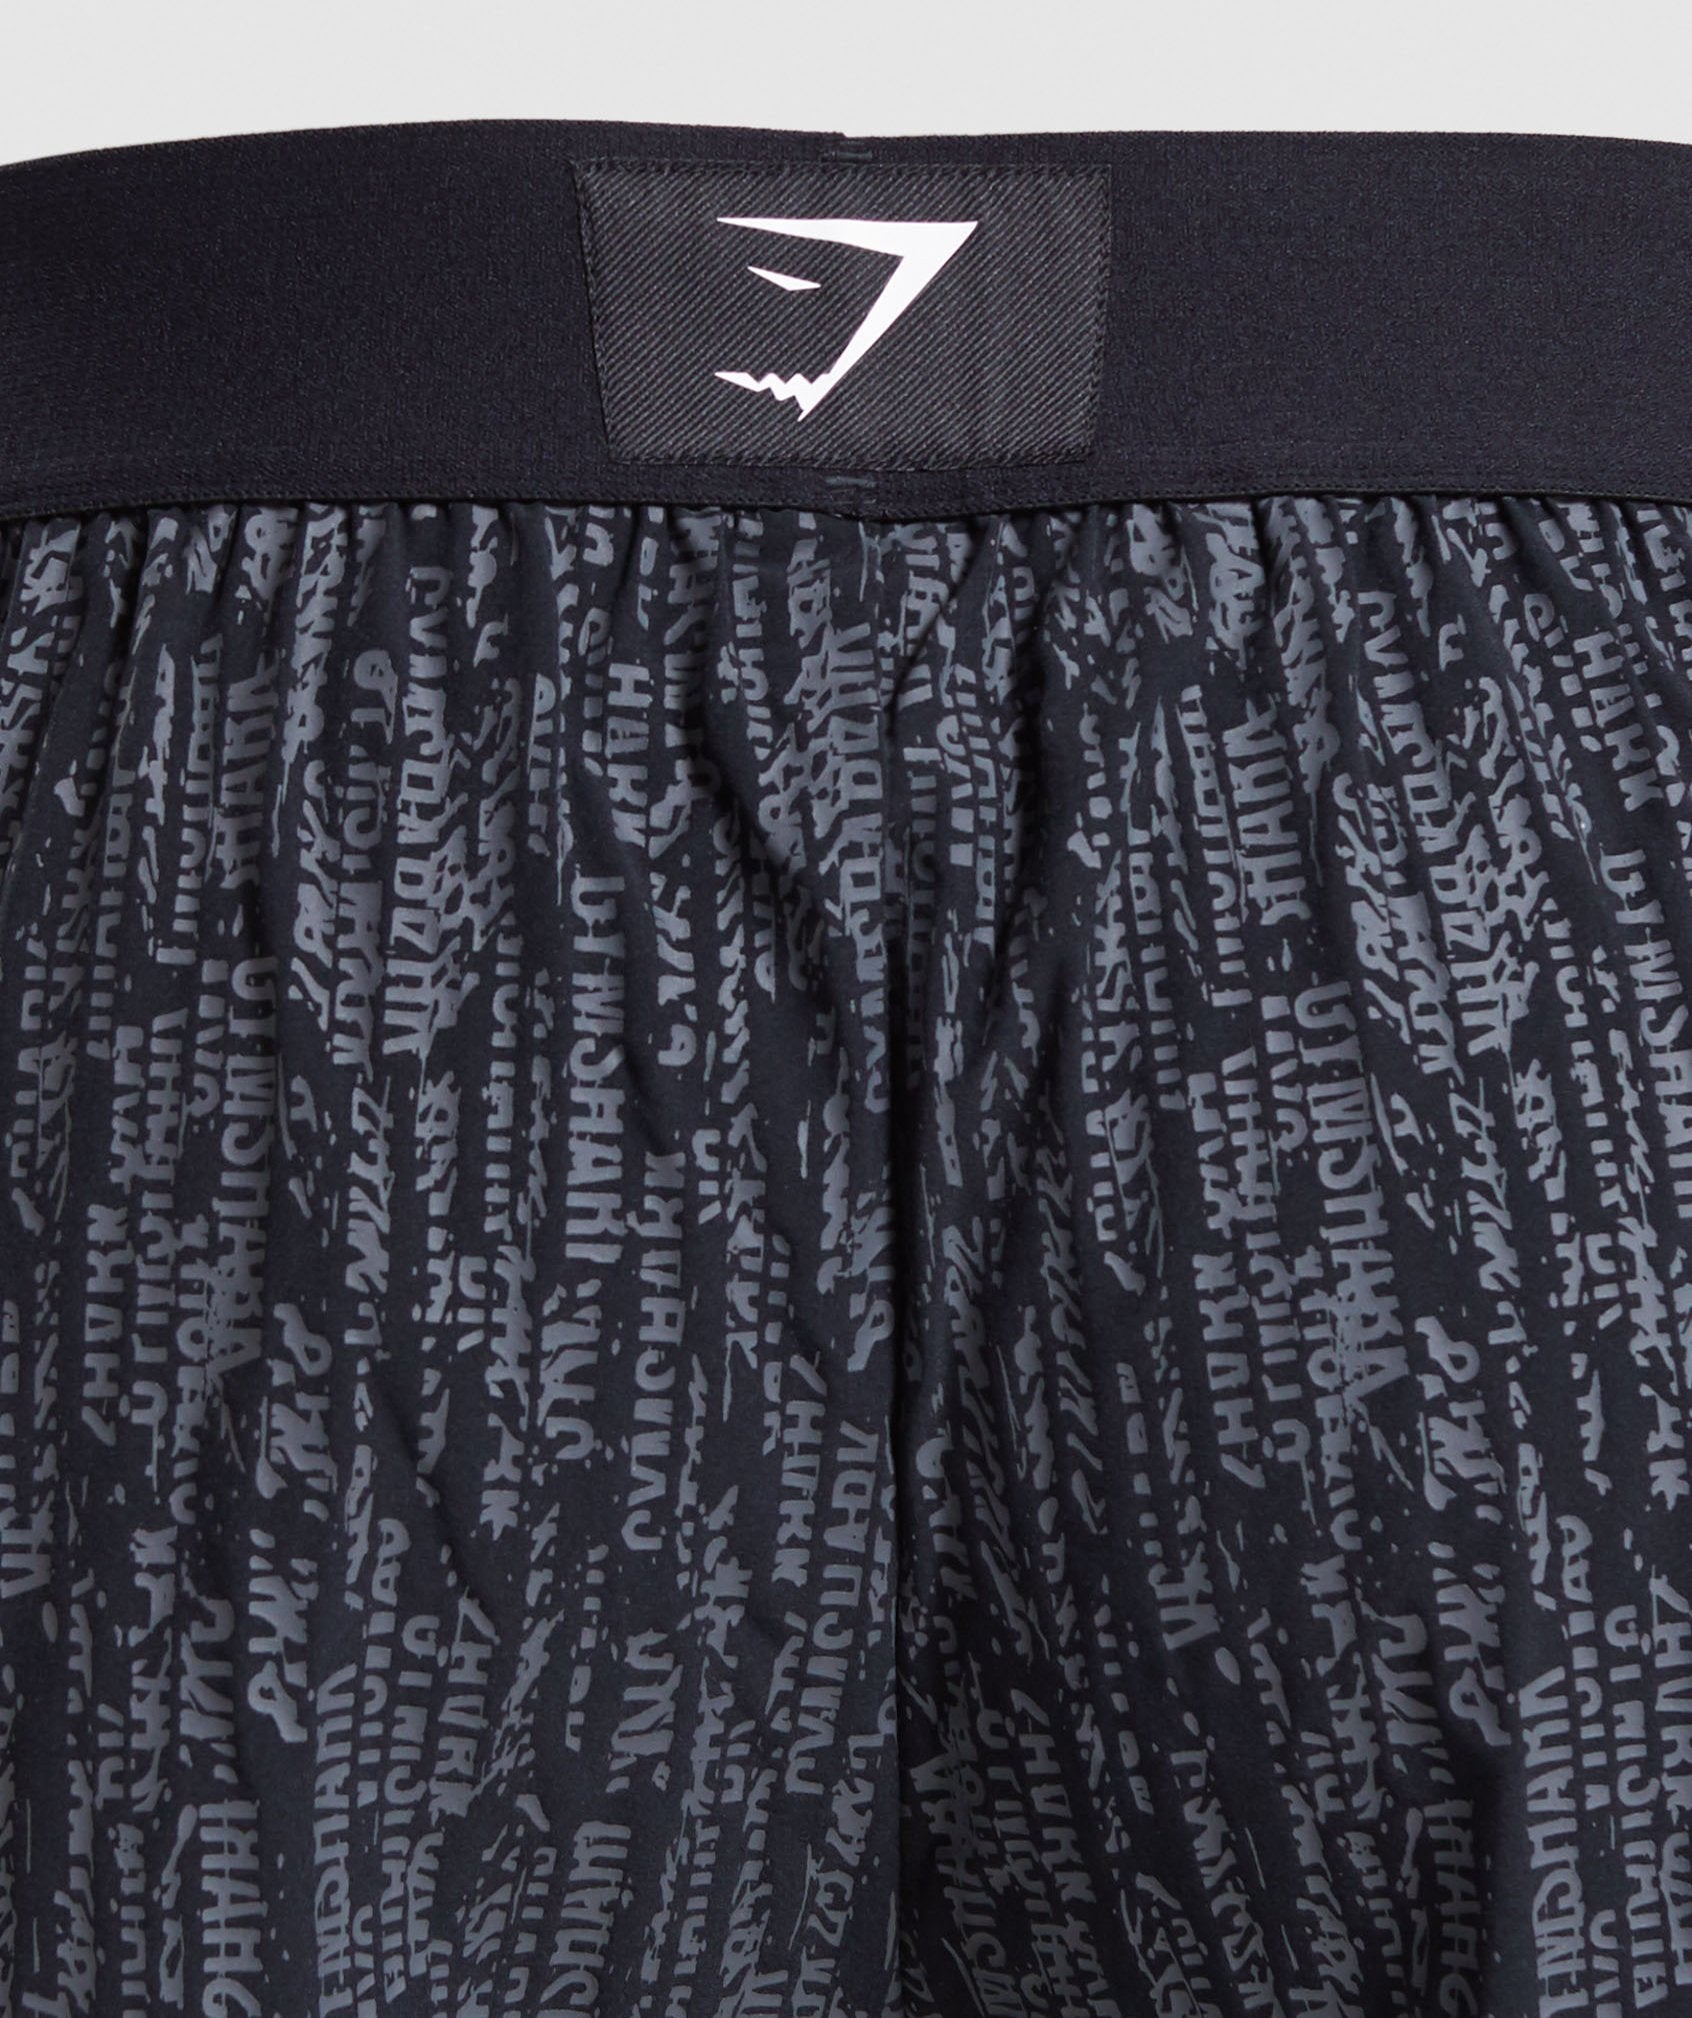 Combat 7" Shorts in Black - view 5